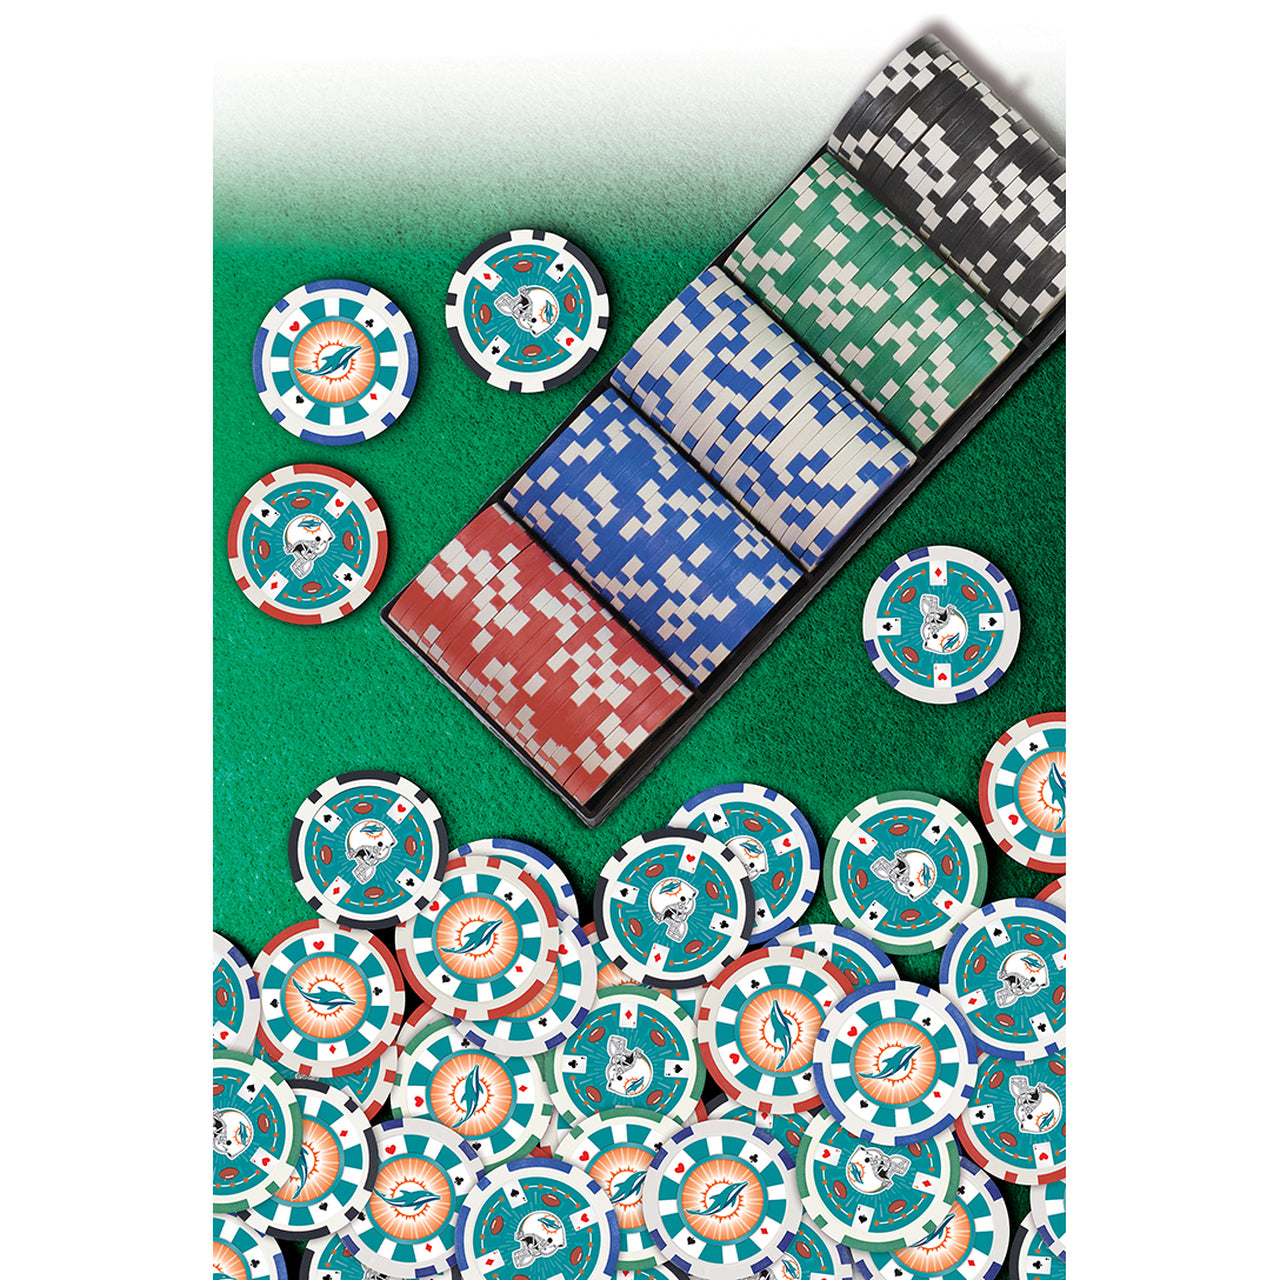 Miami Dolphins Poker Chips 100 Piece Set by Masterpieces